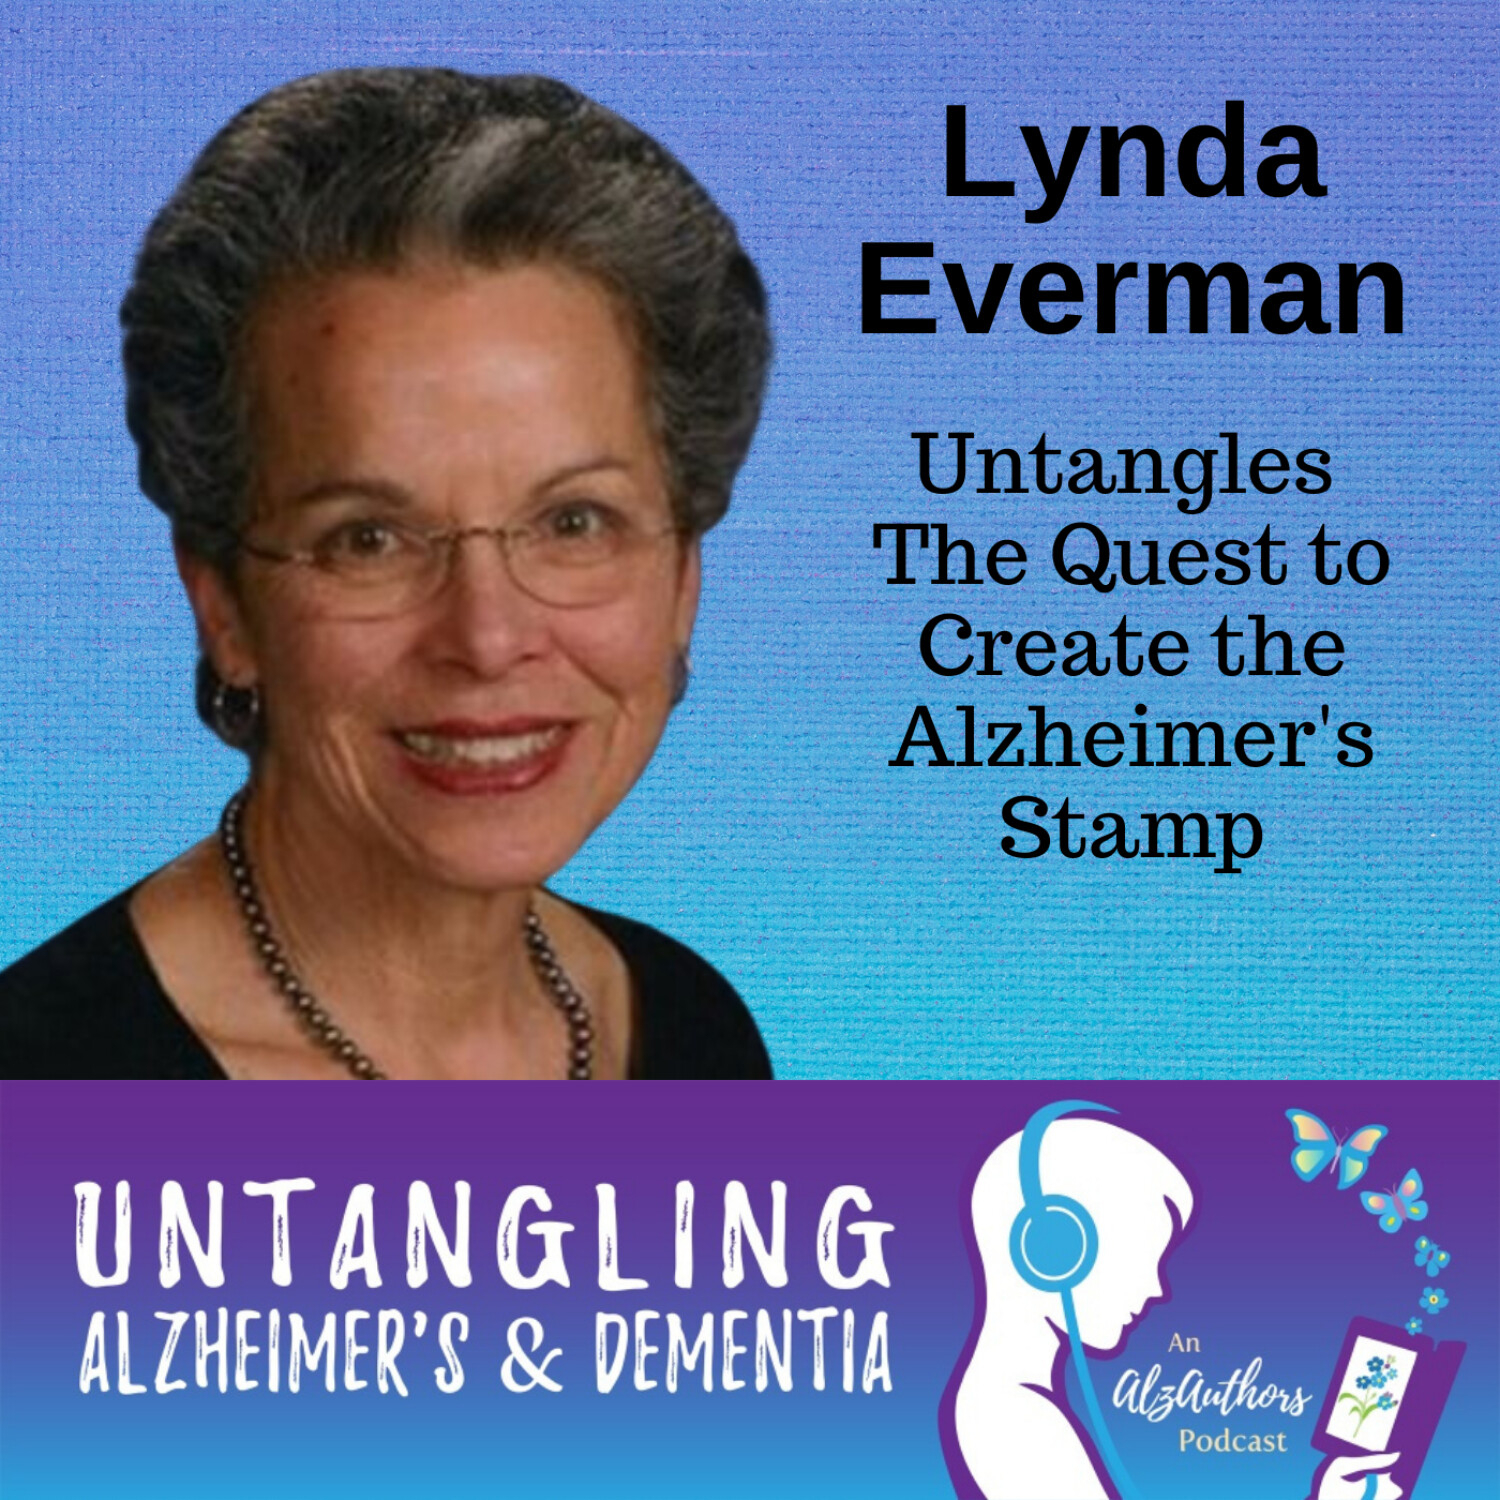 Lynda Everman Untangles the Quest to Create the Alzheimer's Stamp